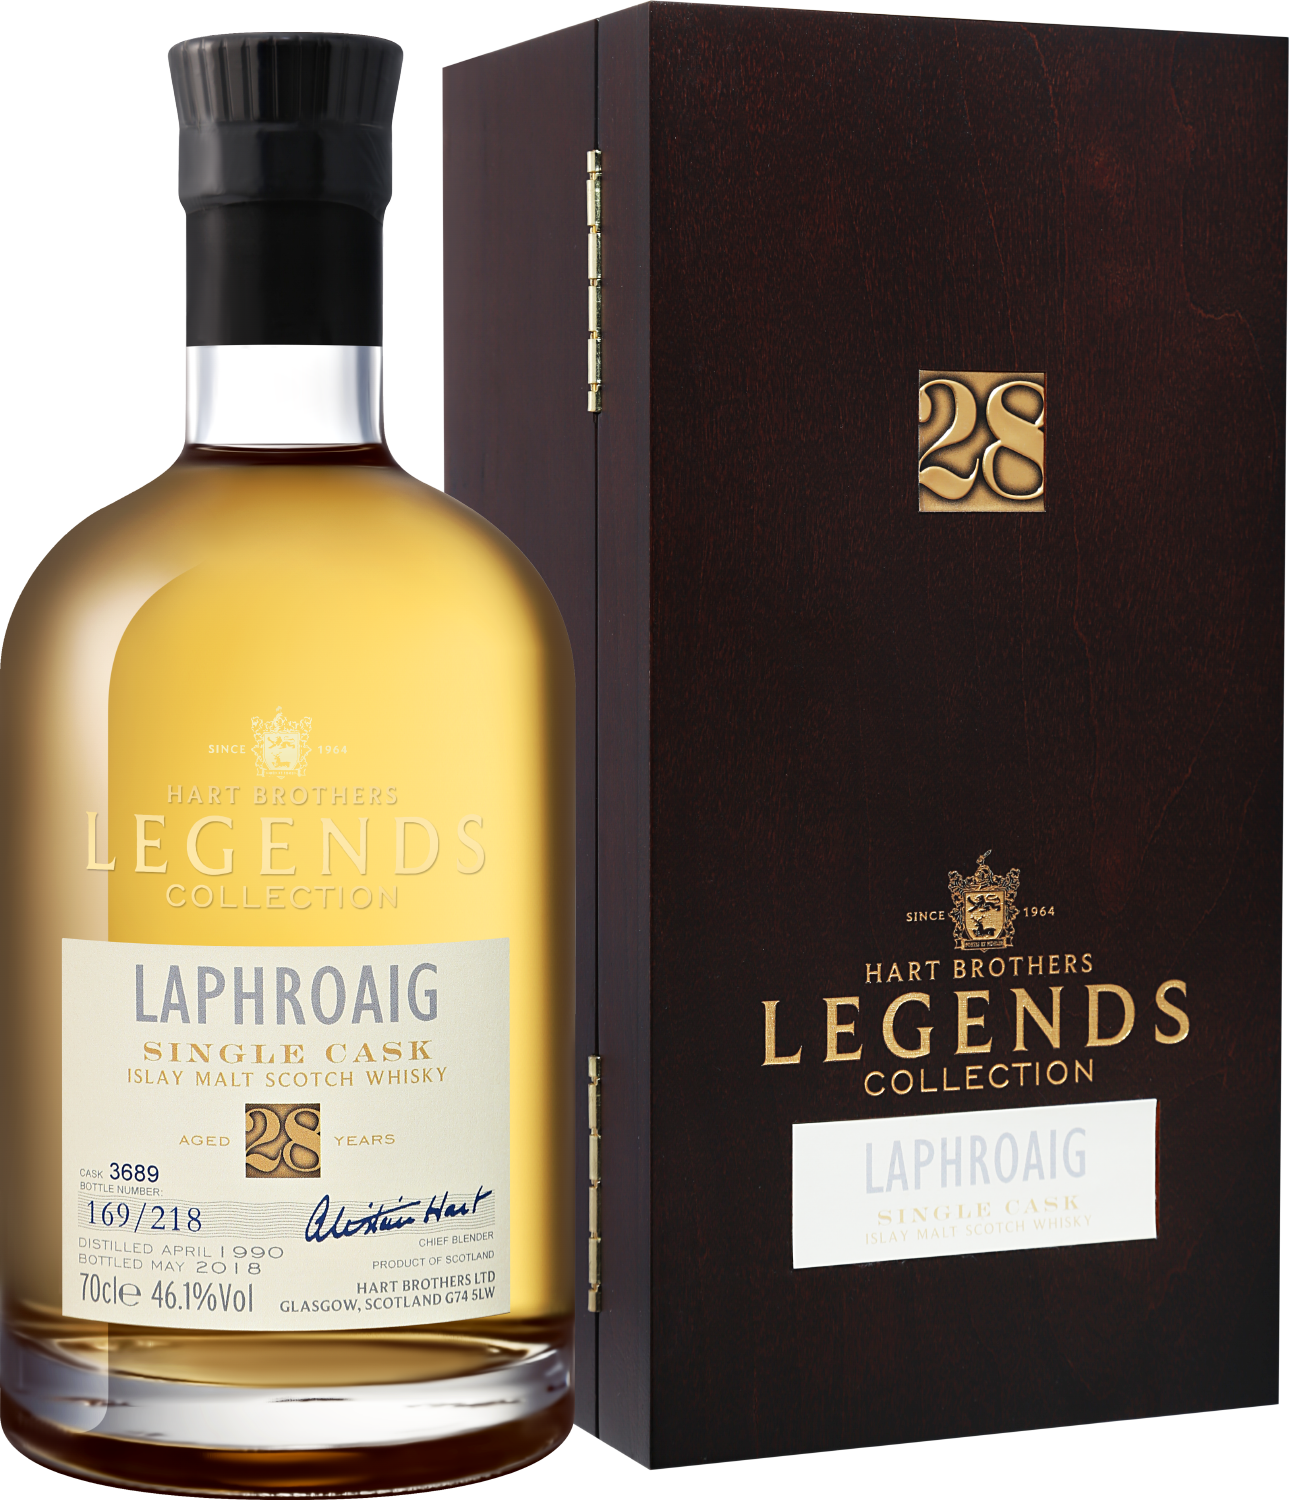 Hart Brothers Legends Collection Laphroaig Islay Single Cask Malt Scotch Whisky 28 y.o. (gift box) laphroaig islay single malt scotch whisky 10 y o gift box with 2 glasses